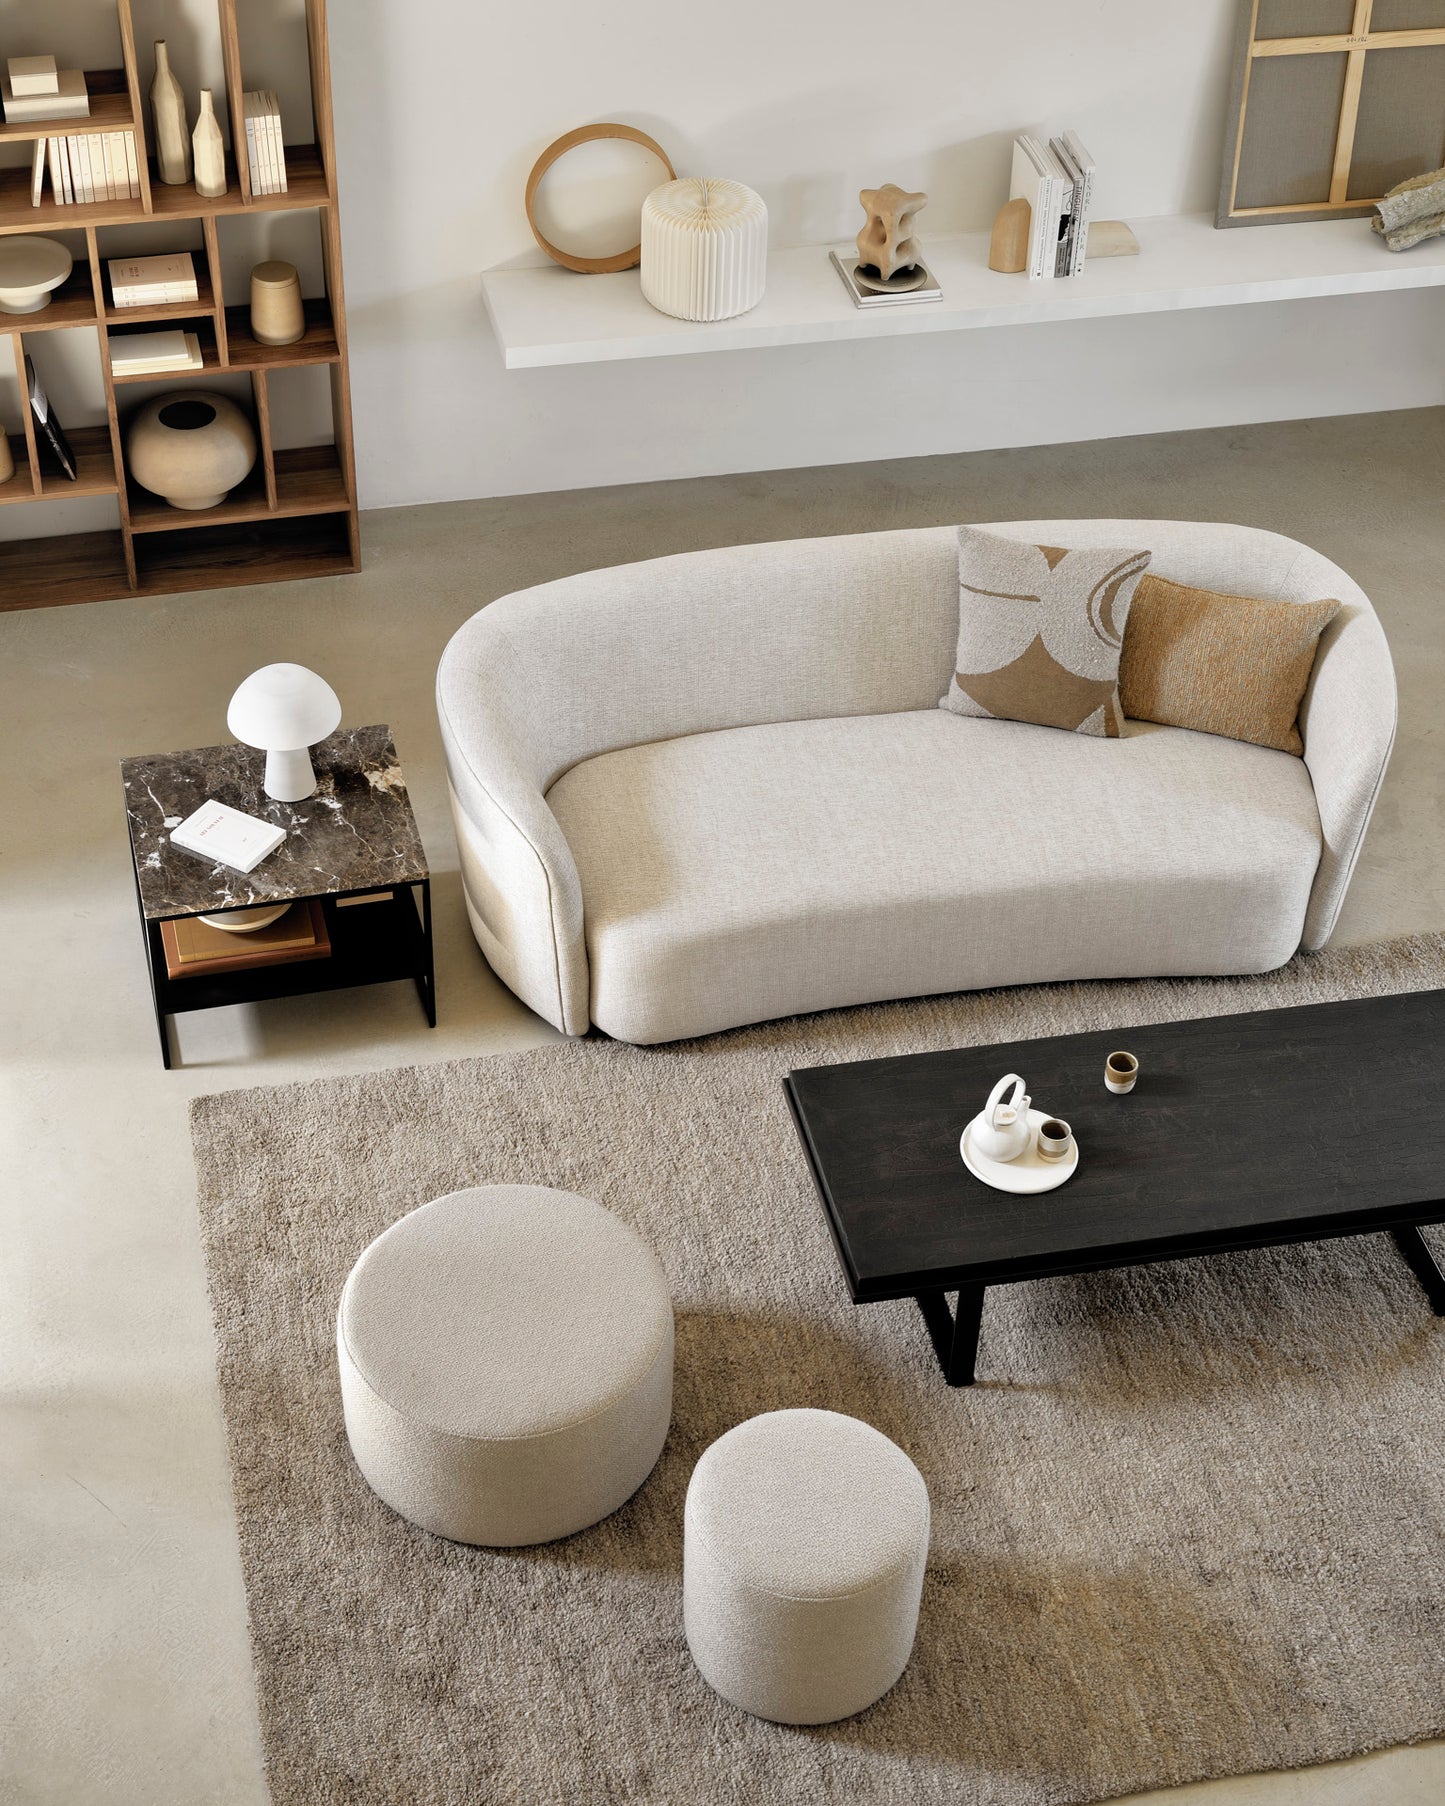 Ethnicraft Stability Coffee Table available from Make Your House A Home, Bendigo, Victoria, Australia